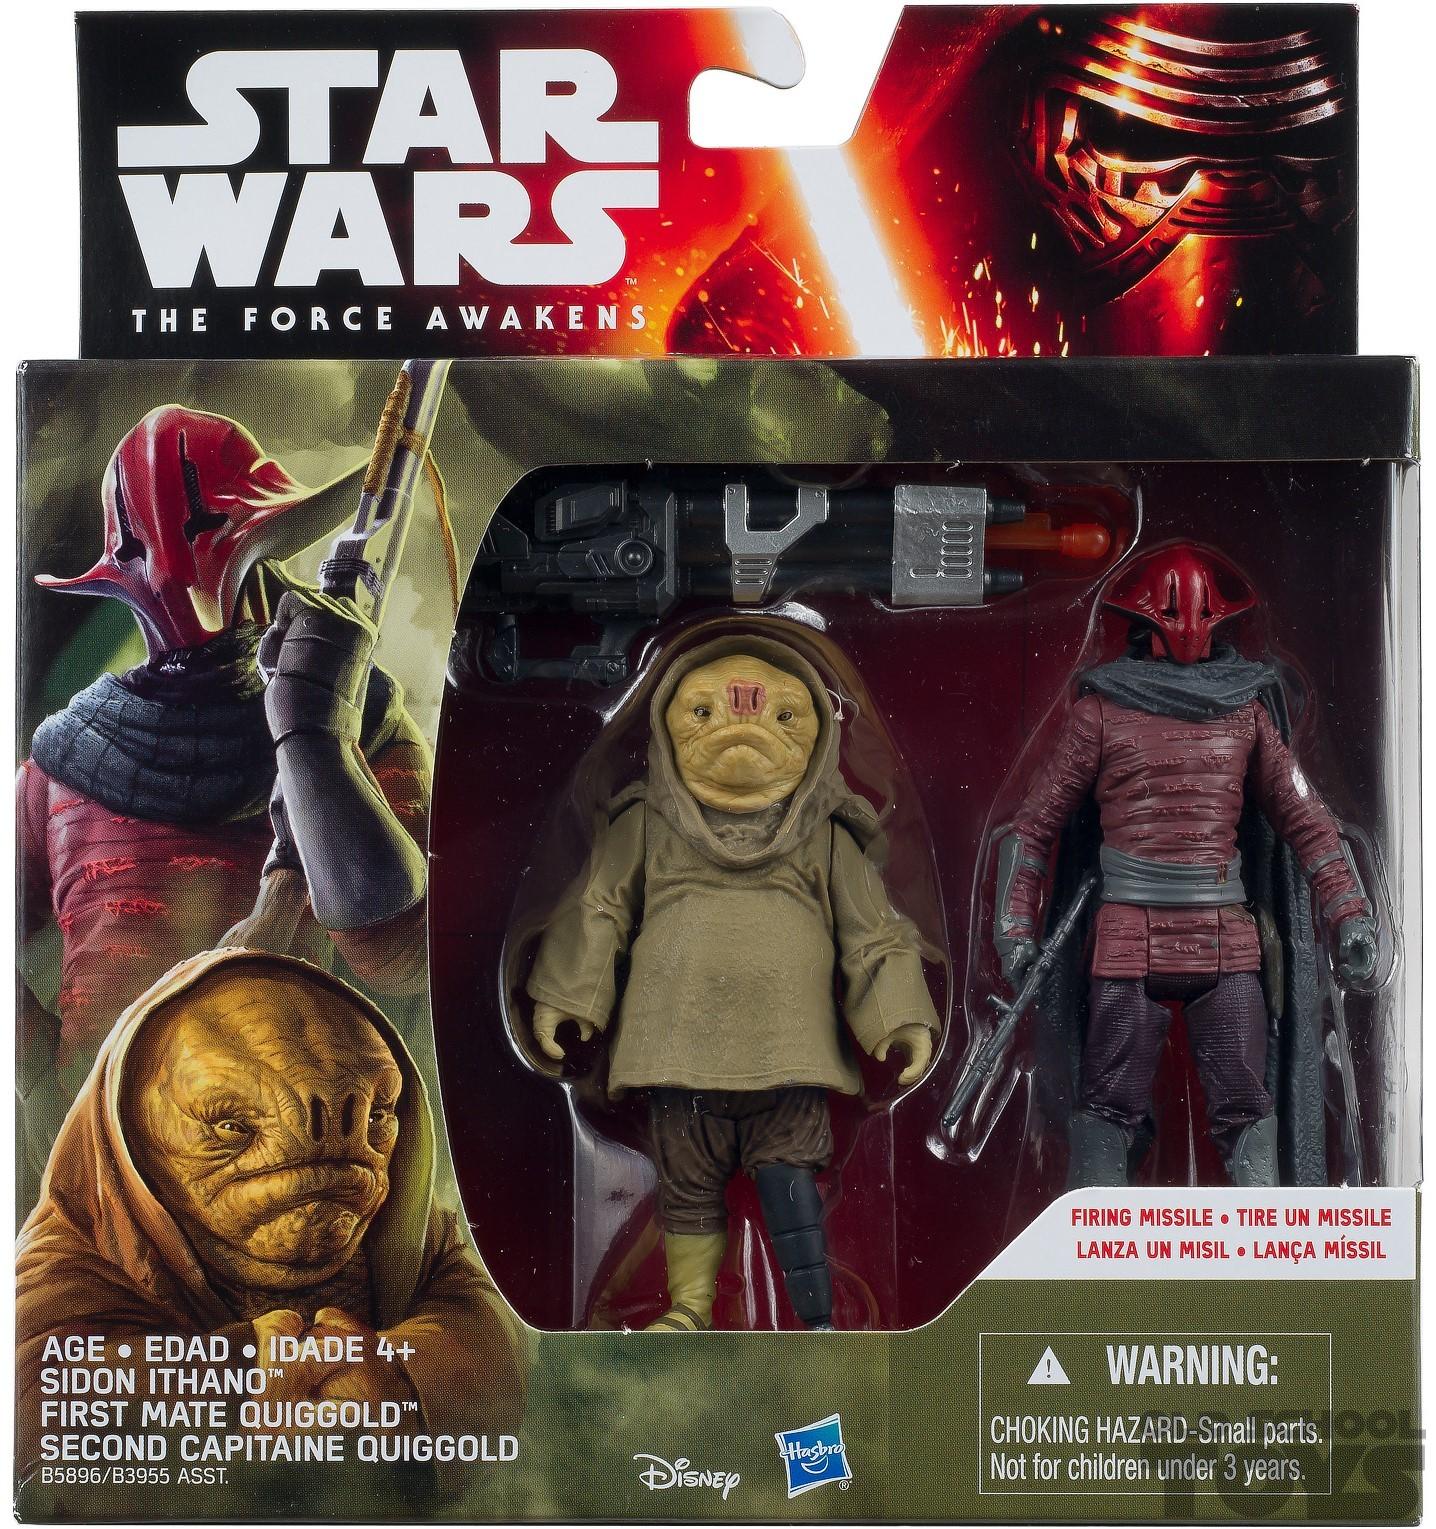 Serie van Detector schaal Star Wars Sidon Ithano & First Mate Quiggold the Force Awakens in doos |  Old School Toys